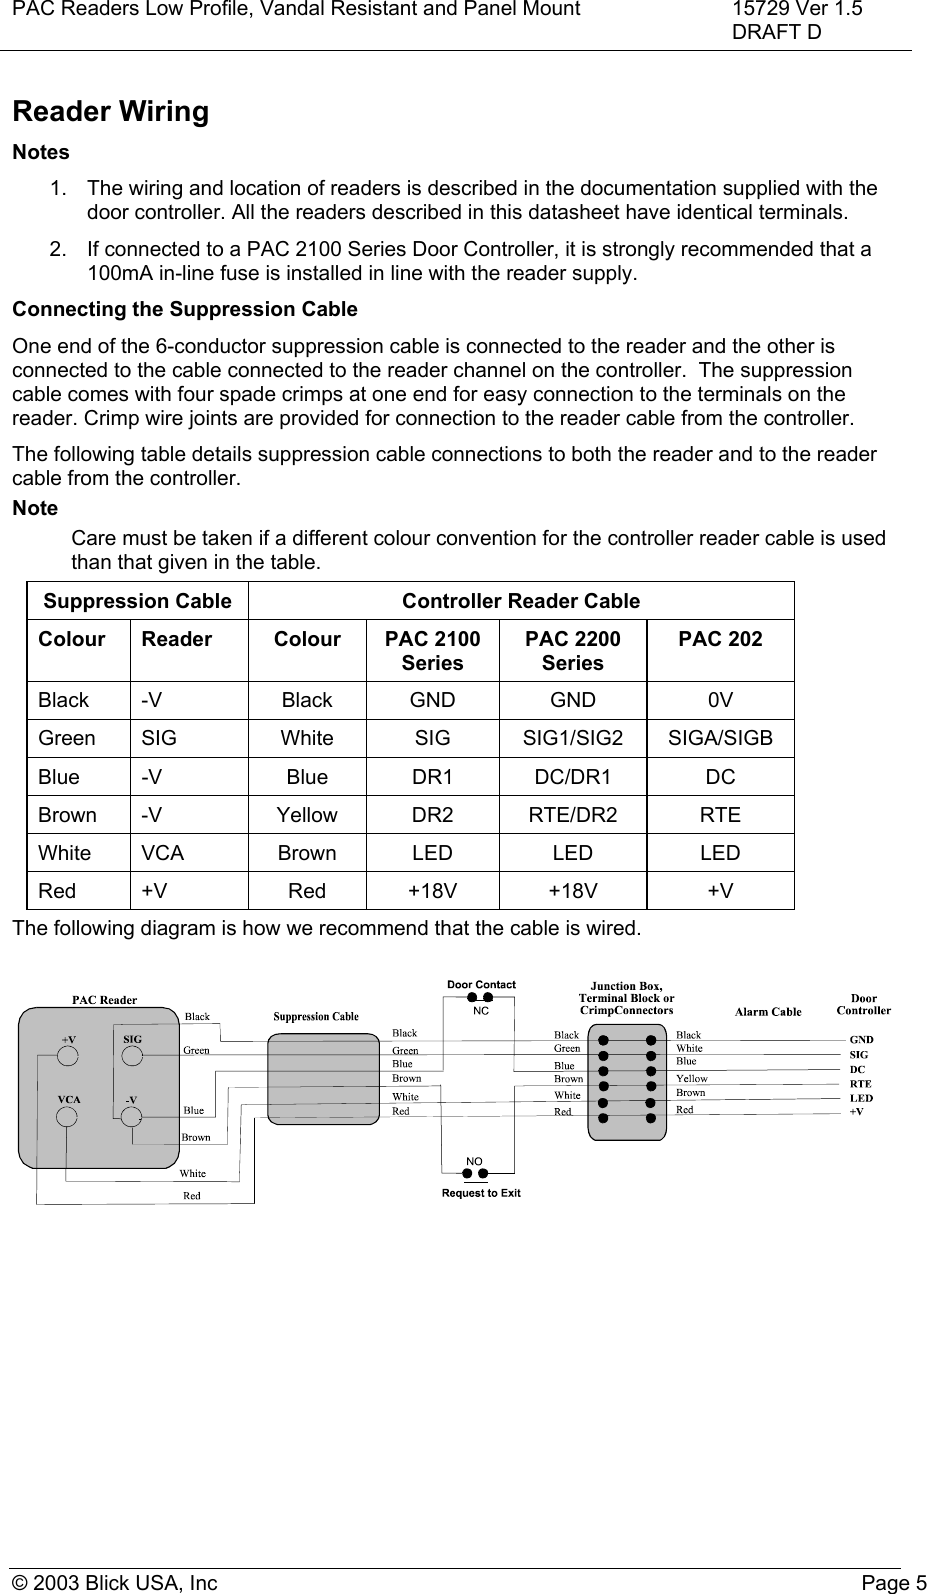 PAC Readers Low Profile, Vandal Resistant and Panel Mount 15729 Ver 1.5DRAFT D© 2003 Blick USA, Inc Page 5Reader WiringNotes1.  The wiring and location of readers is described in the documentation supplied with thedoor controller. All the readers described in this datasheet have identical terminals.2.  If connected to a PAC 2100 Series Door Controller, it is strongly recommended that a100mA in-line fuse is installed in line with the reader supply.Connecting the Suppression CableOne end of the 6-conductor suppression cable is connected to the reader and the other isconnected to the cable connected to the reader channel on the controller.  The suppressioncable comes with four spade crimps at one end for easy connection to the terminals on thereader. Crimp wire joints are provided for connection to the reader cable from the controller.The following table details suppression cable connections to both the reader and to the readercable from the controller.NoteCare must be taken if a different colour convention for the controller reader cable is usedthan that given in the table.Suppression Cable Controller Reader CableColour Reader Colour PAC 2100SeriesPAC 2200SeriesPAC 202Black -V Black GND GND 0VGreen SIG White SIG SIG1/SIG2 SIGA/SIGBBlue -V Blue DR1 DC/DR1 DCBrown -V Yellow DR2 RTE/DR2 RTEWhite VCA Brown LED LED LEDRed +V Red +18V +18V +VThe following diagram is how we recommend that the cable is wired.